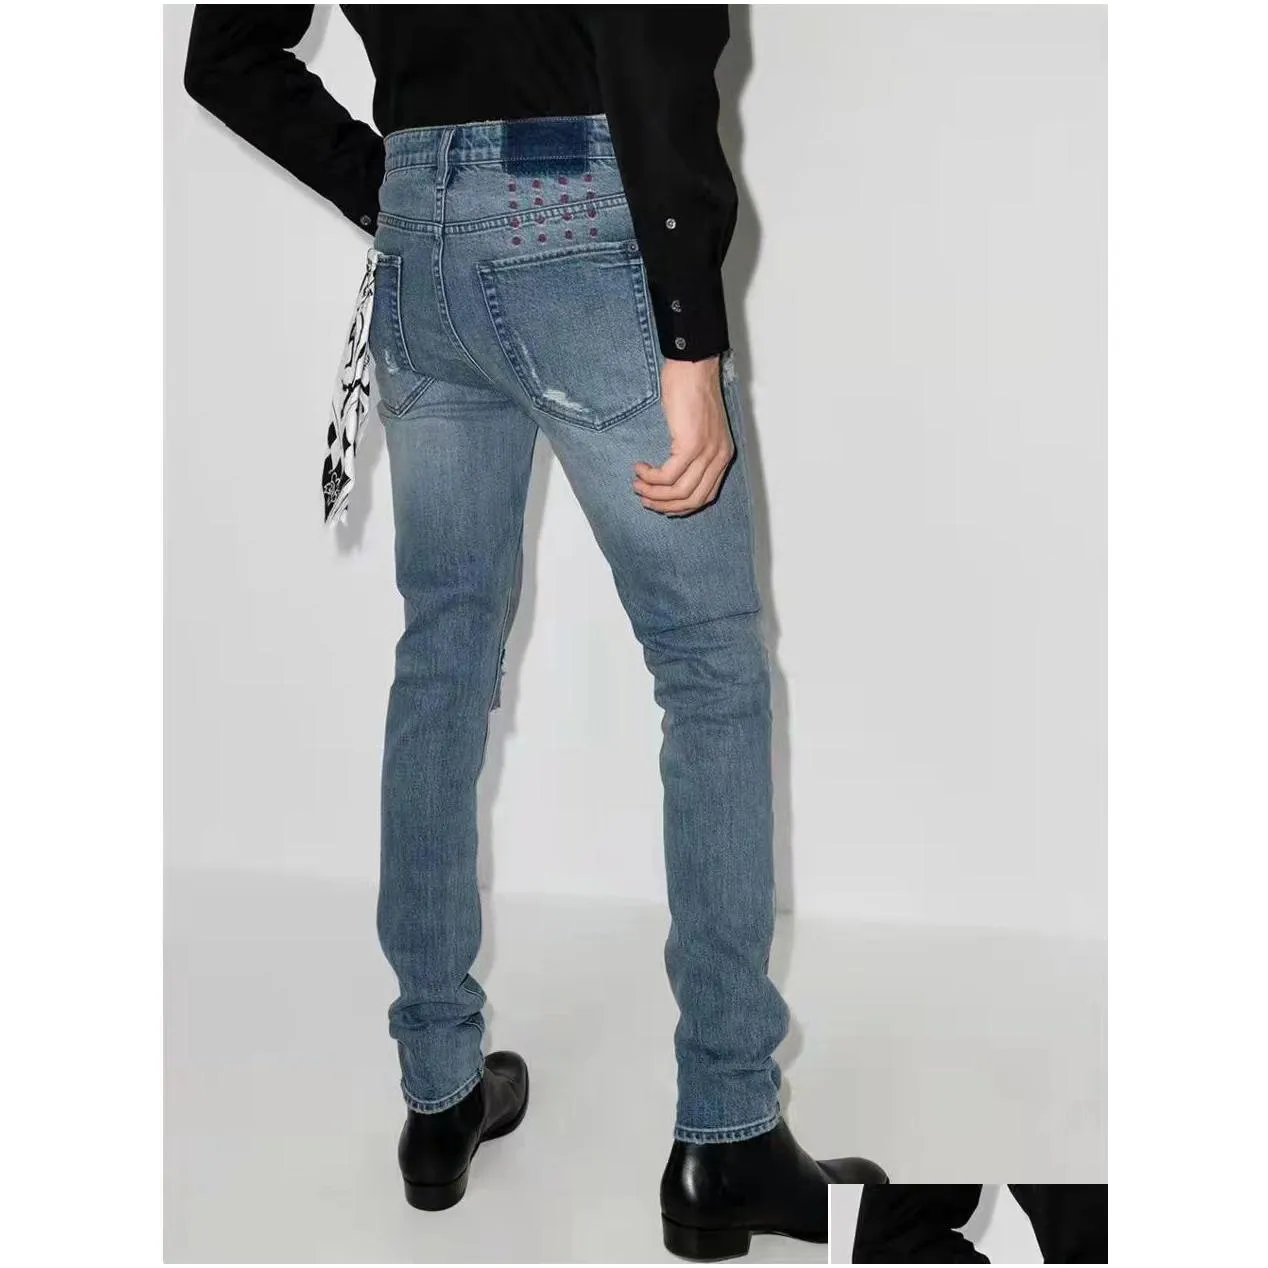 Jeans Mens Designer Trouser Legs Open Fork Tight Capris Denim Trousers Add Fleece Thicken Warm Slimming Jean Pants Brand Clothing Embroidery Printing